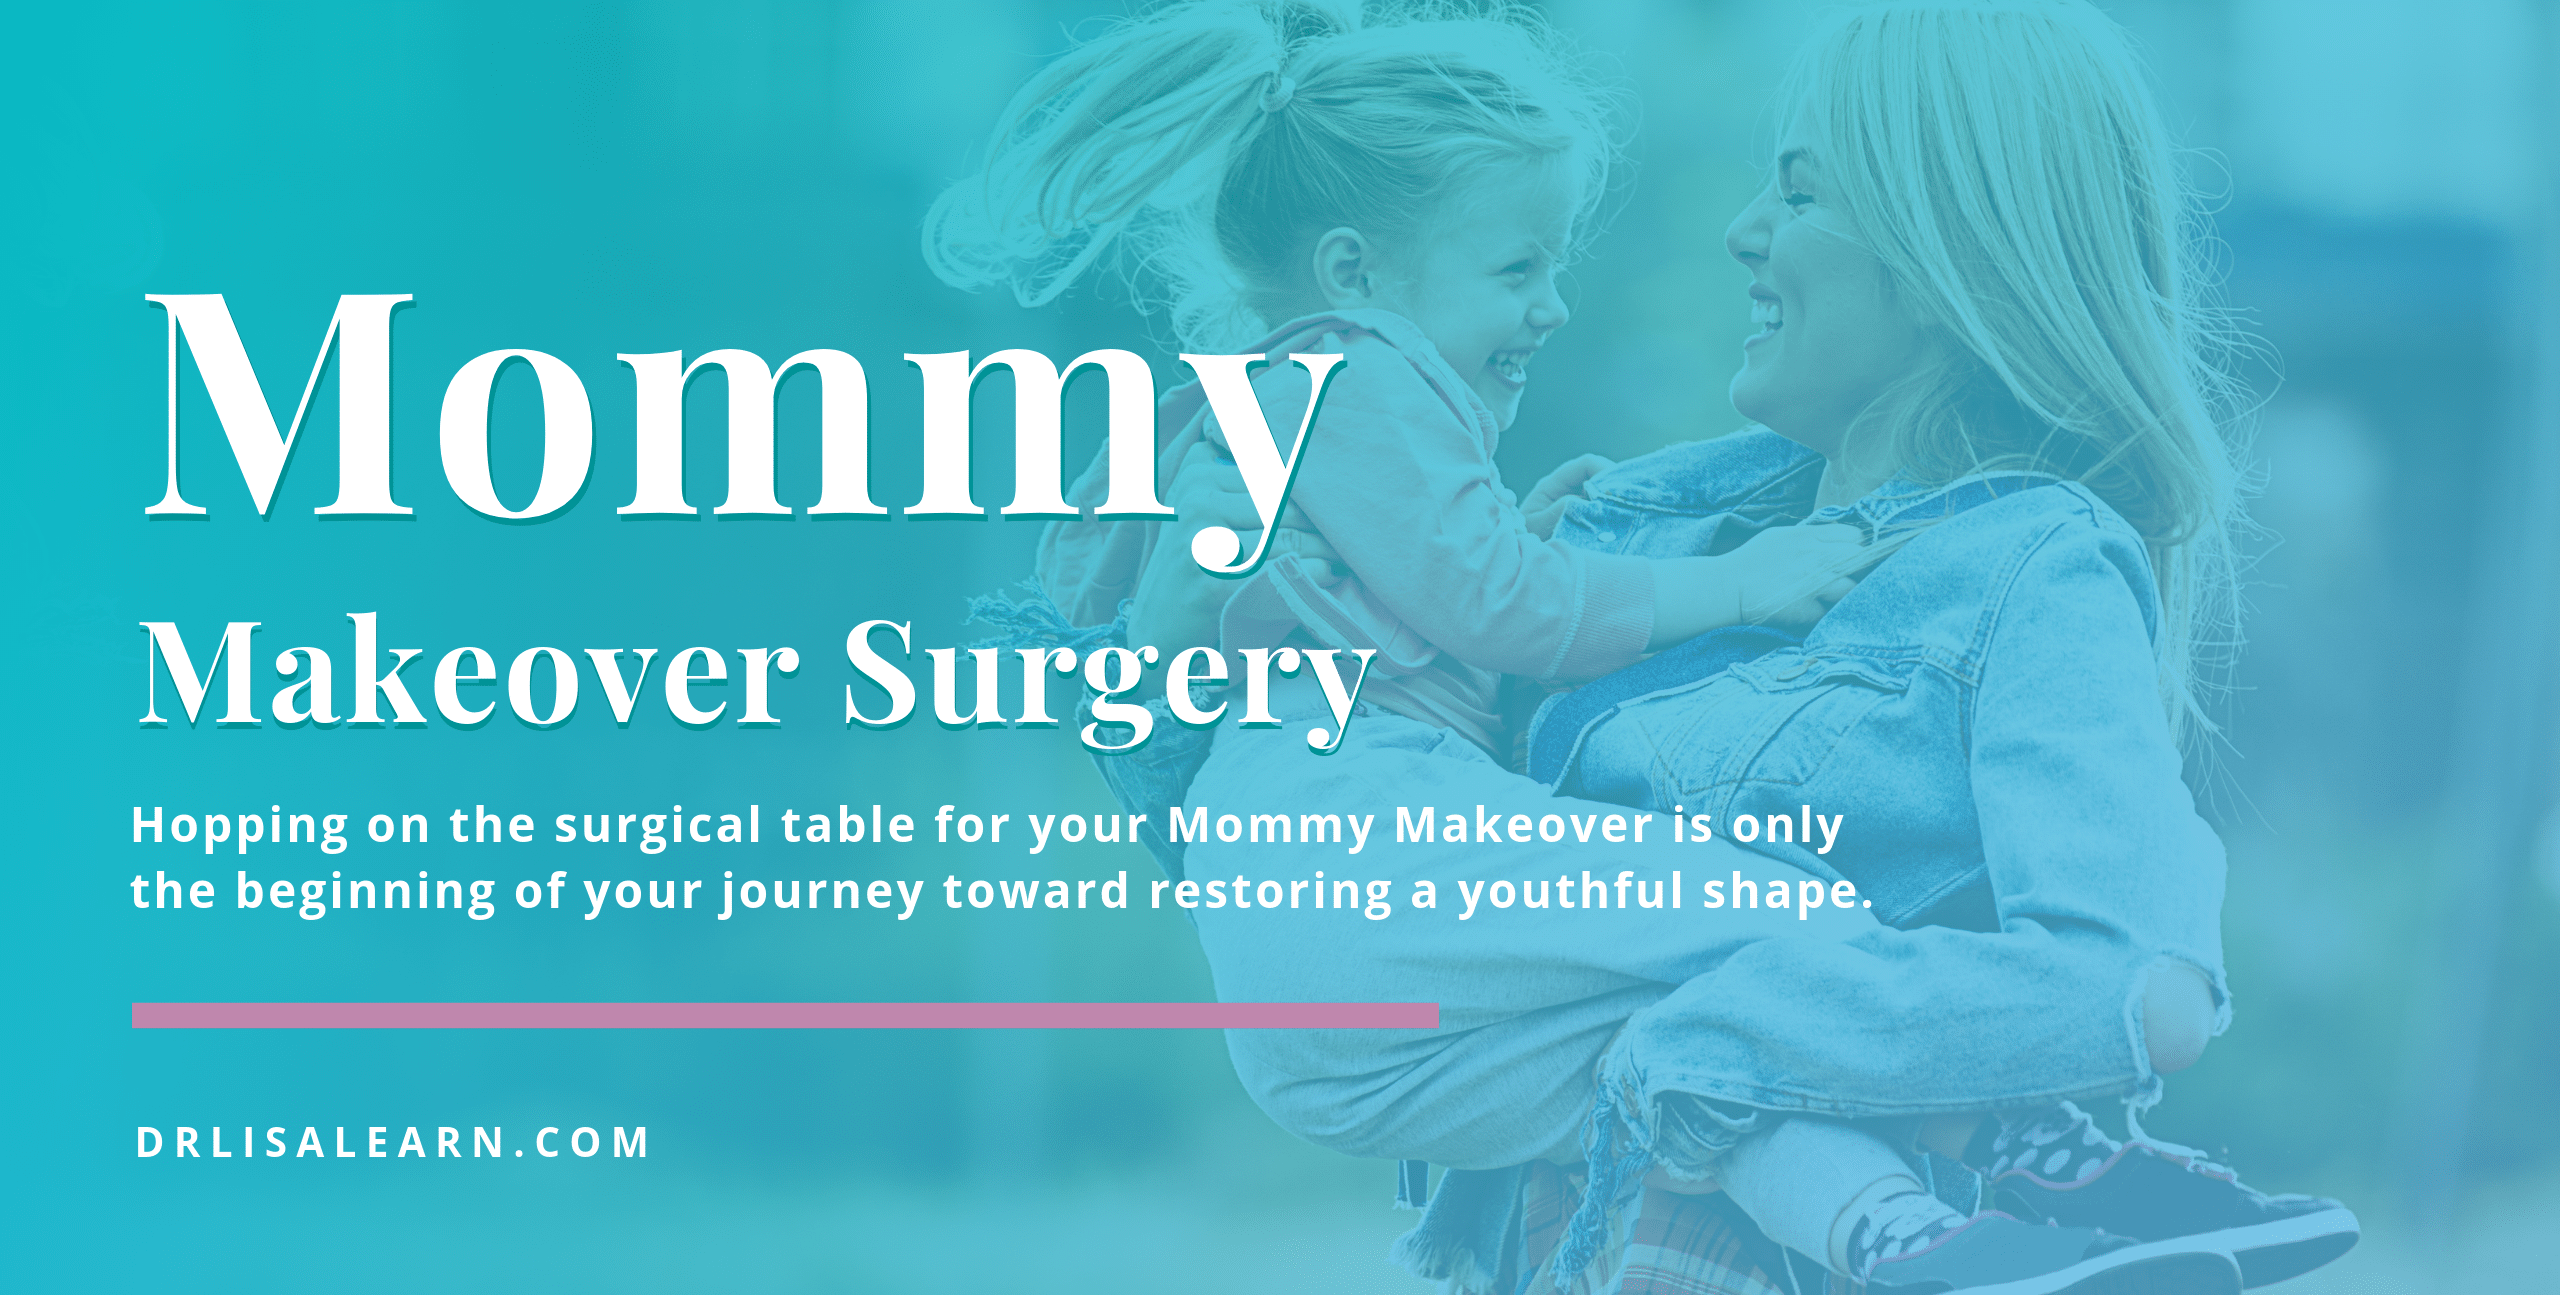 Mommy Makeover Surgery